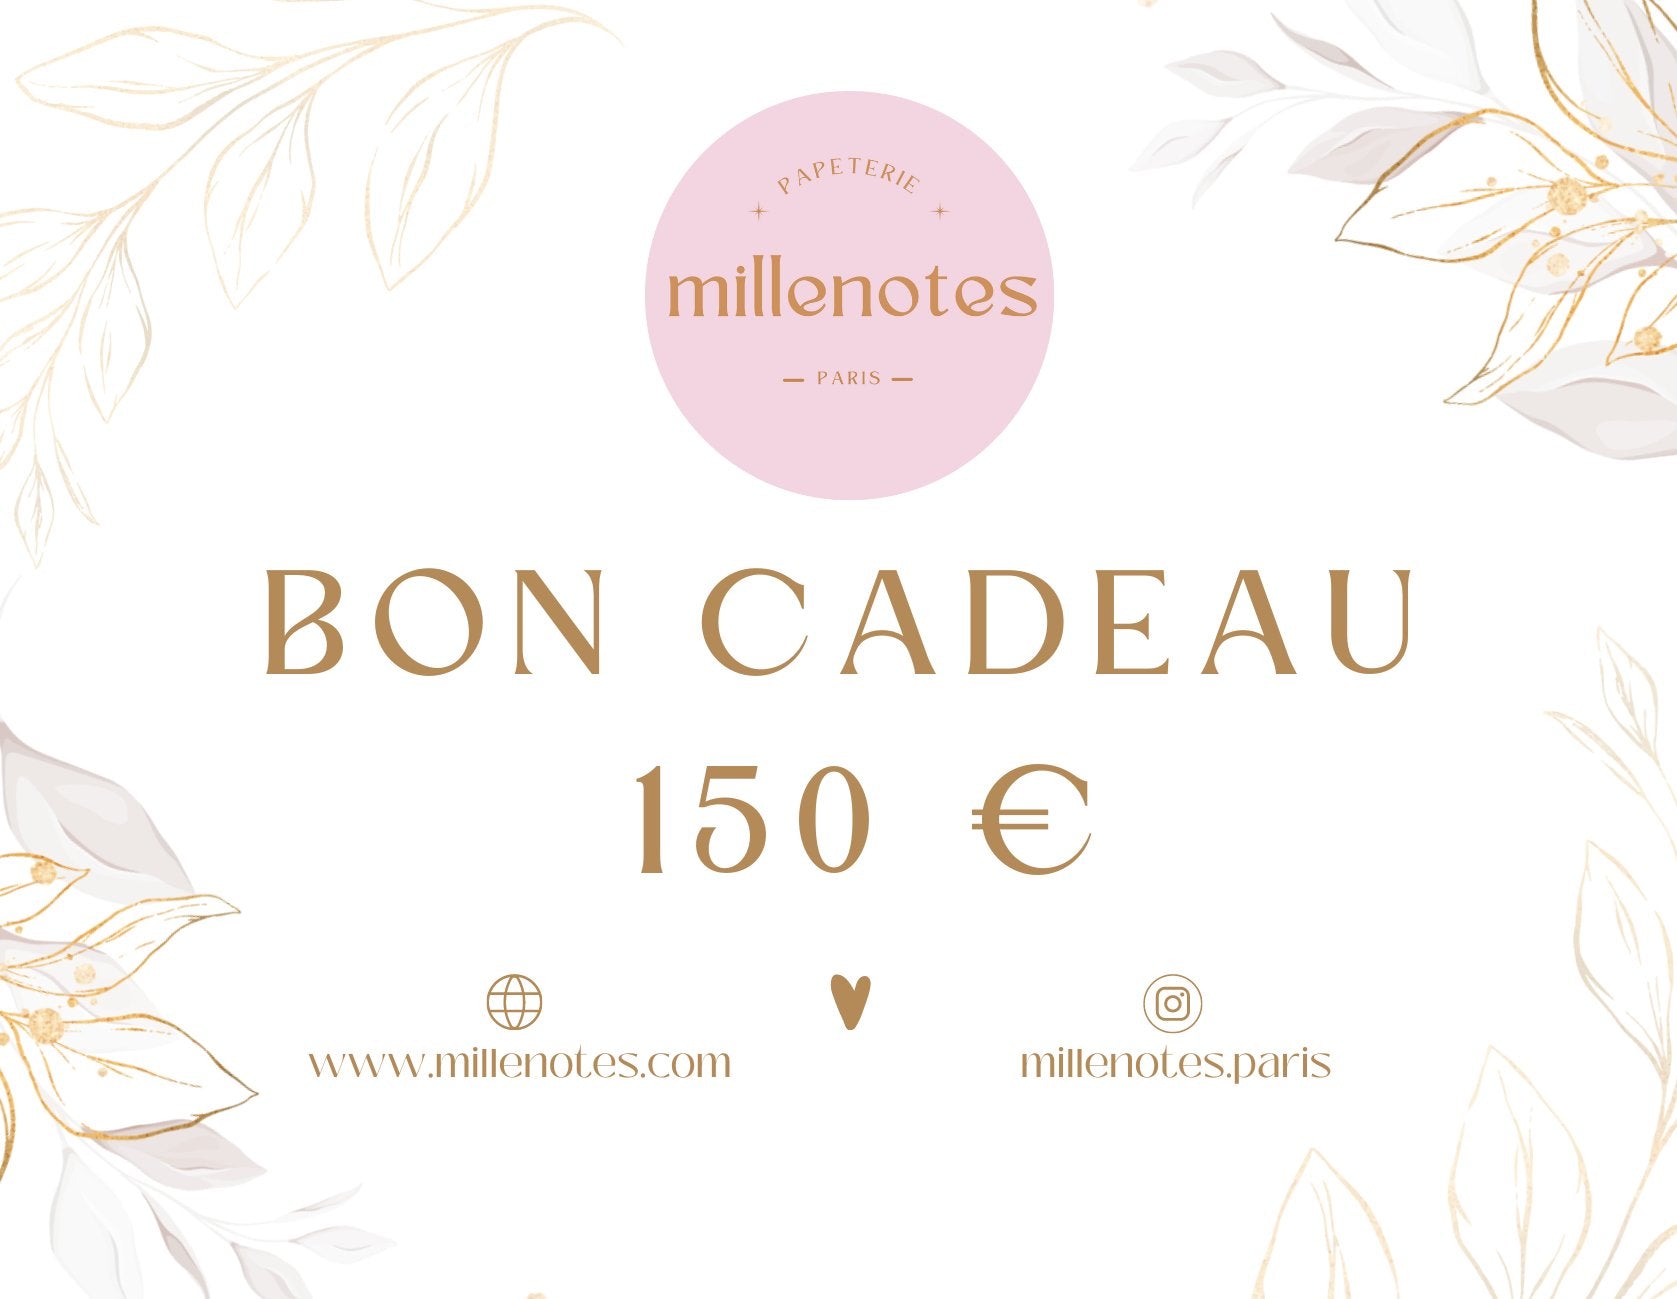 millenotes gift e-card - millenotes - €150.00 - millenotes